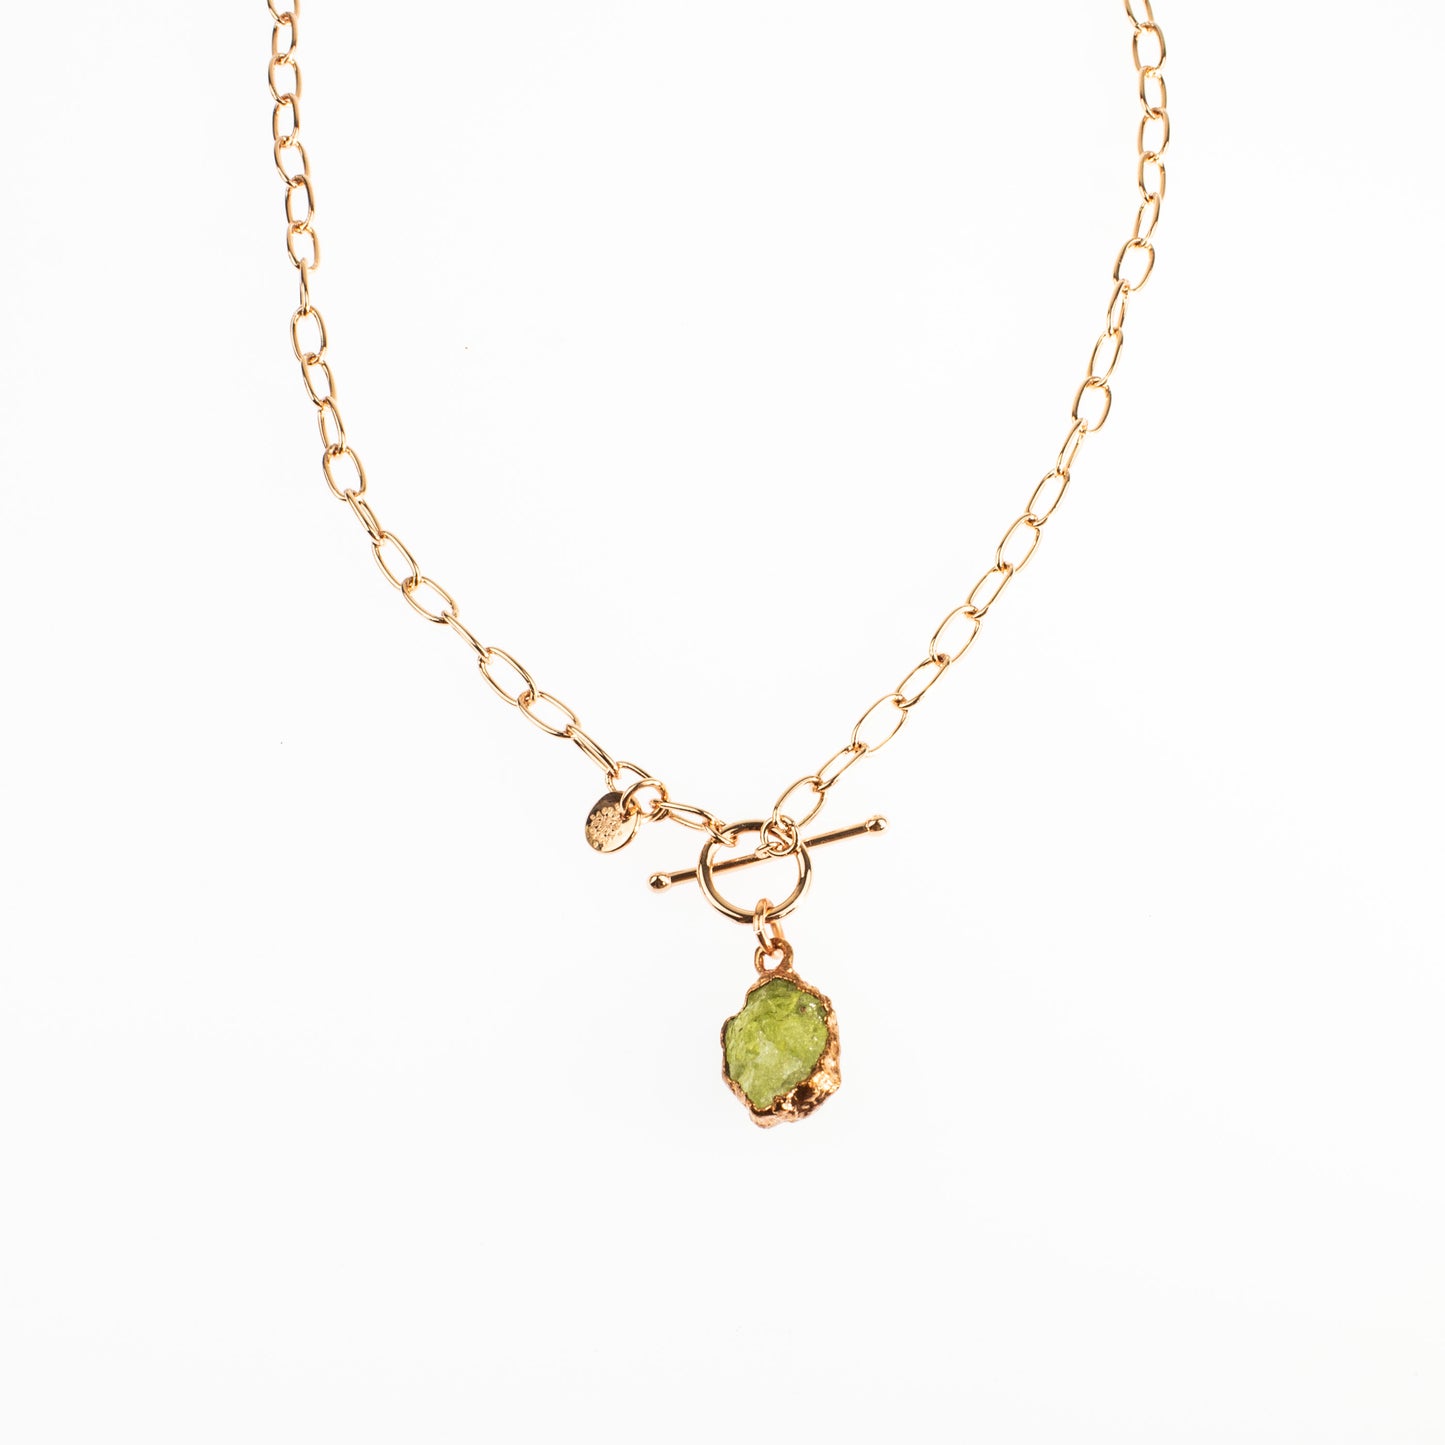 Large Green Garnet Toggle Clasp Necklace